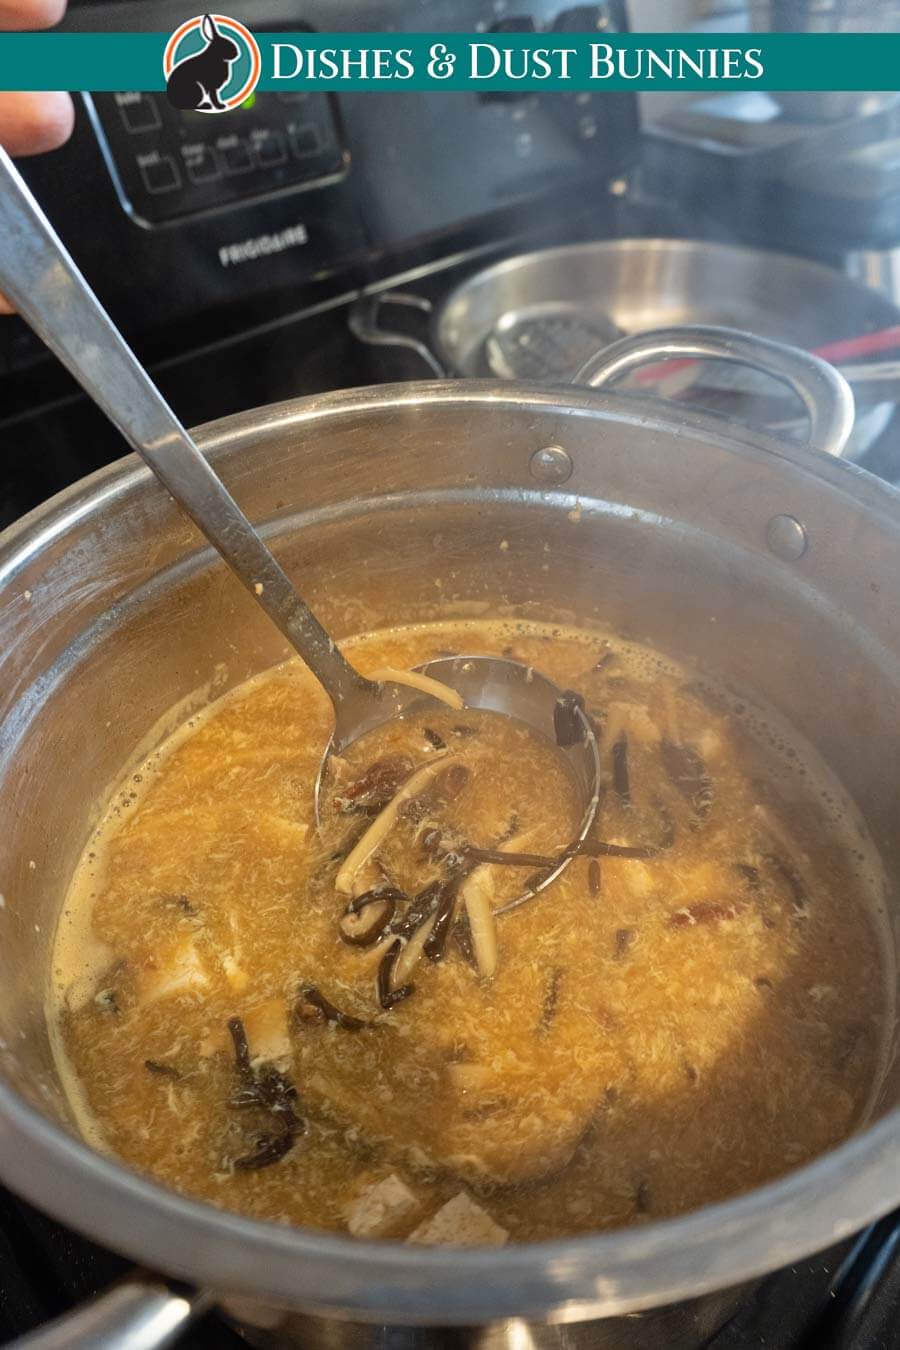 Hot and sour soup simmering after cooking the egg to for delicate egg ribbons. 